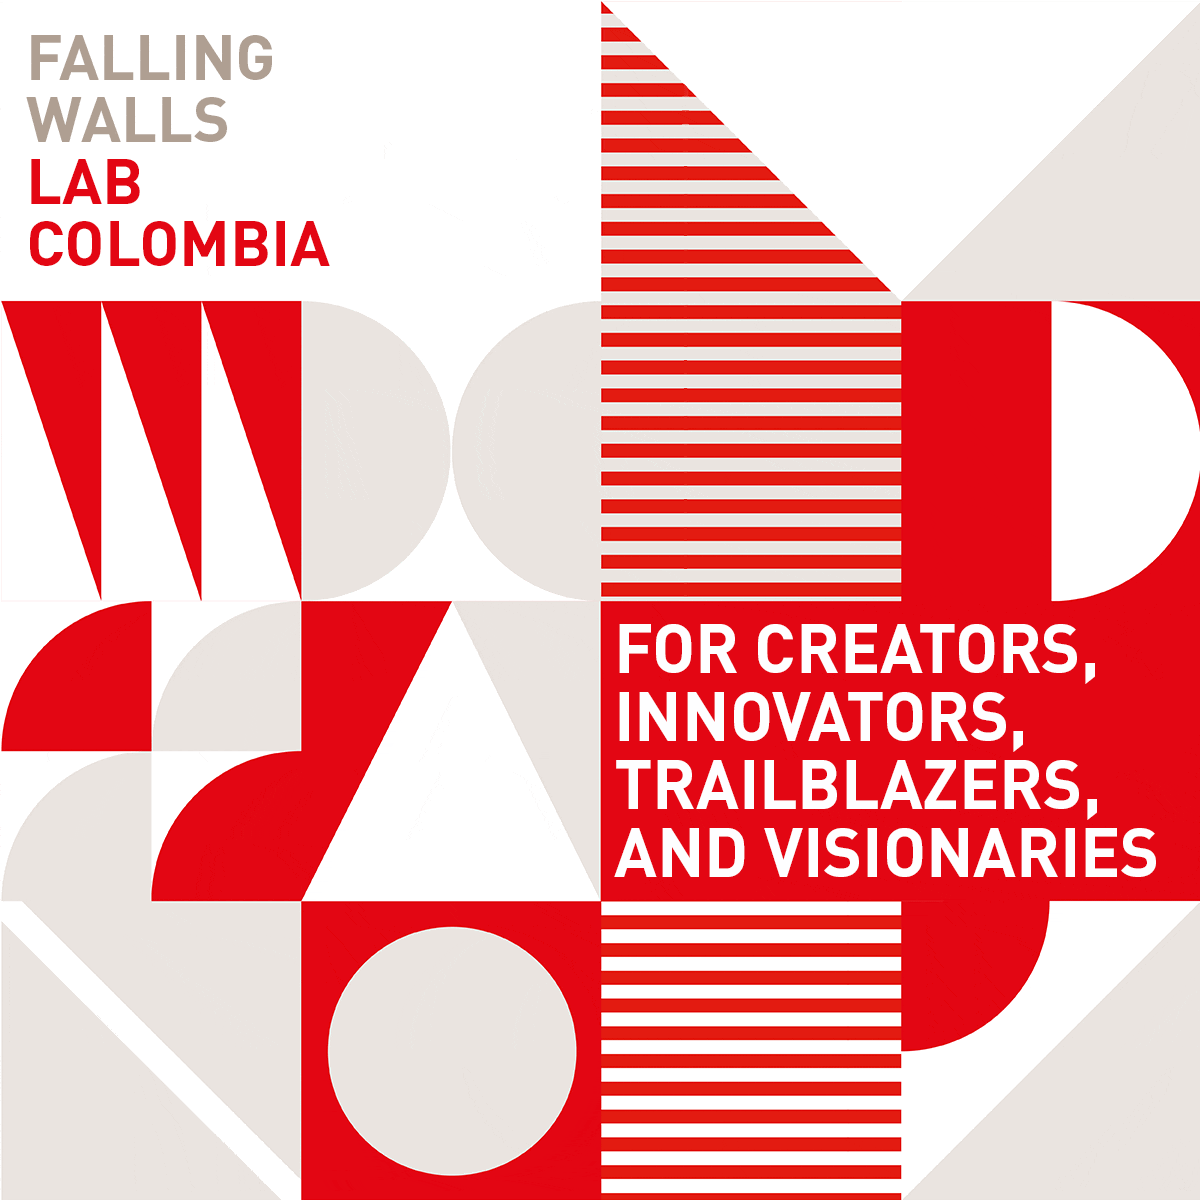 LAB22_Colombia_Fb(1200x1200px)